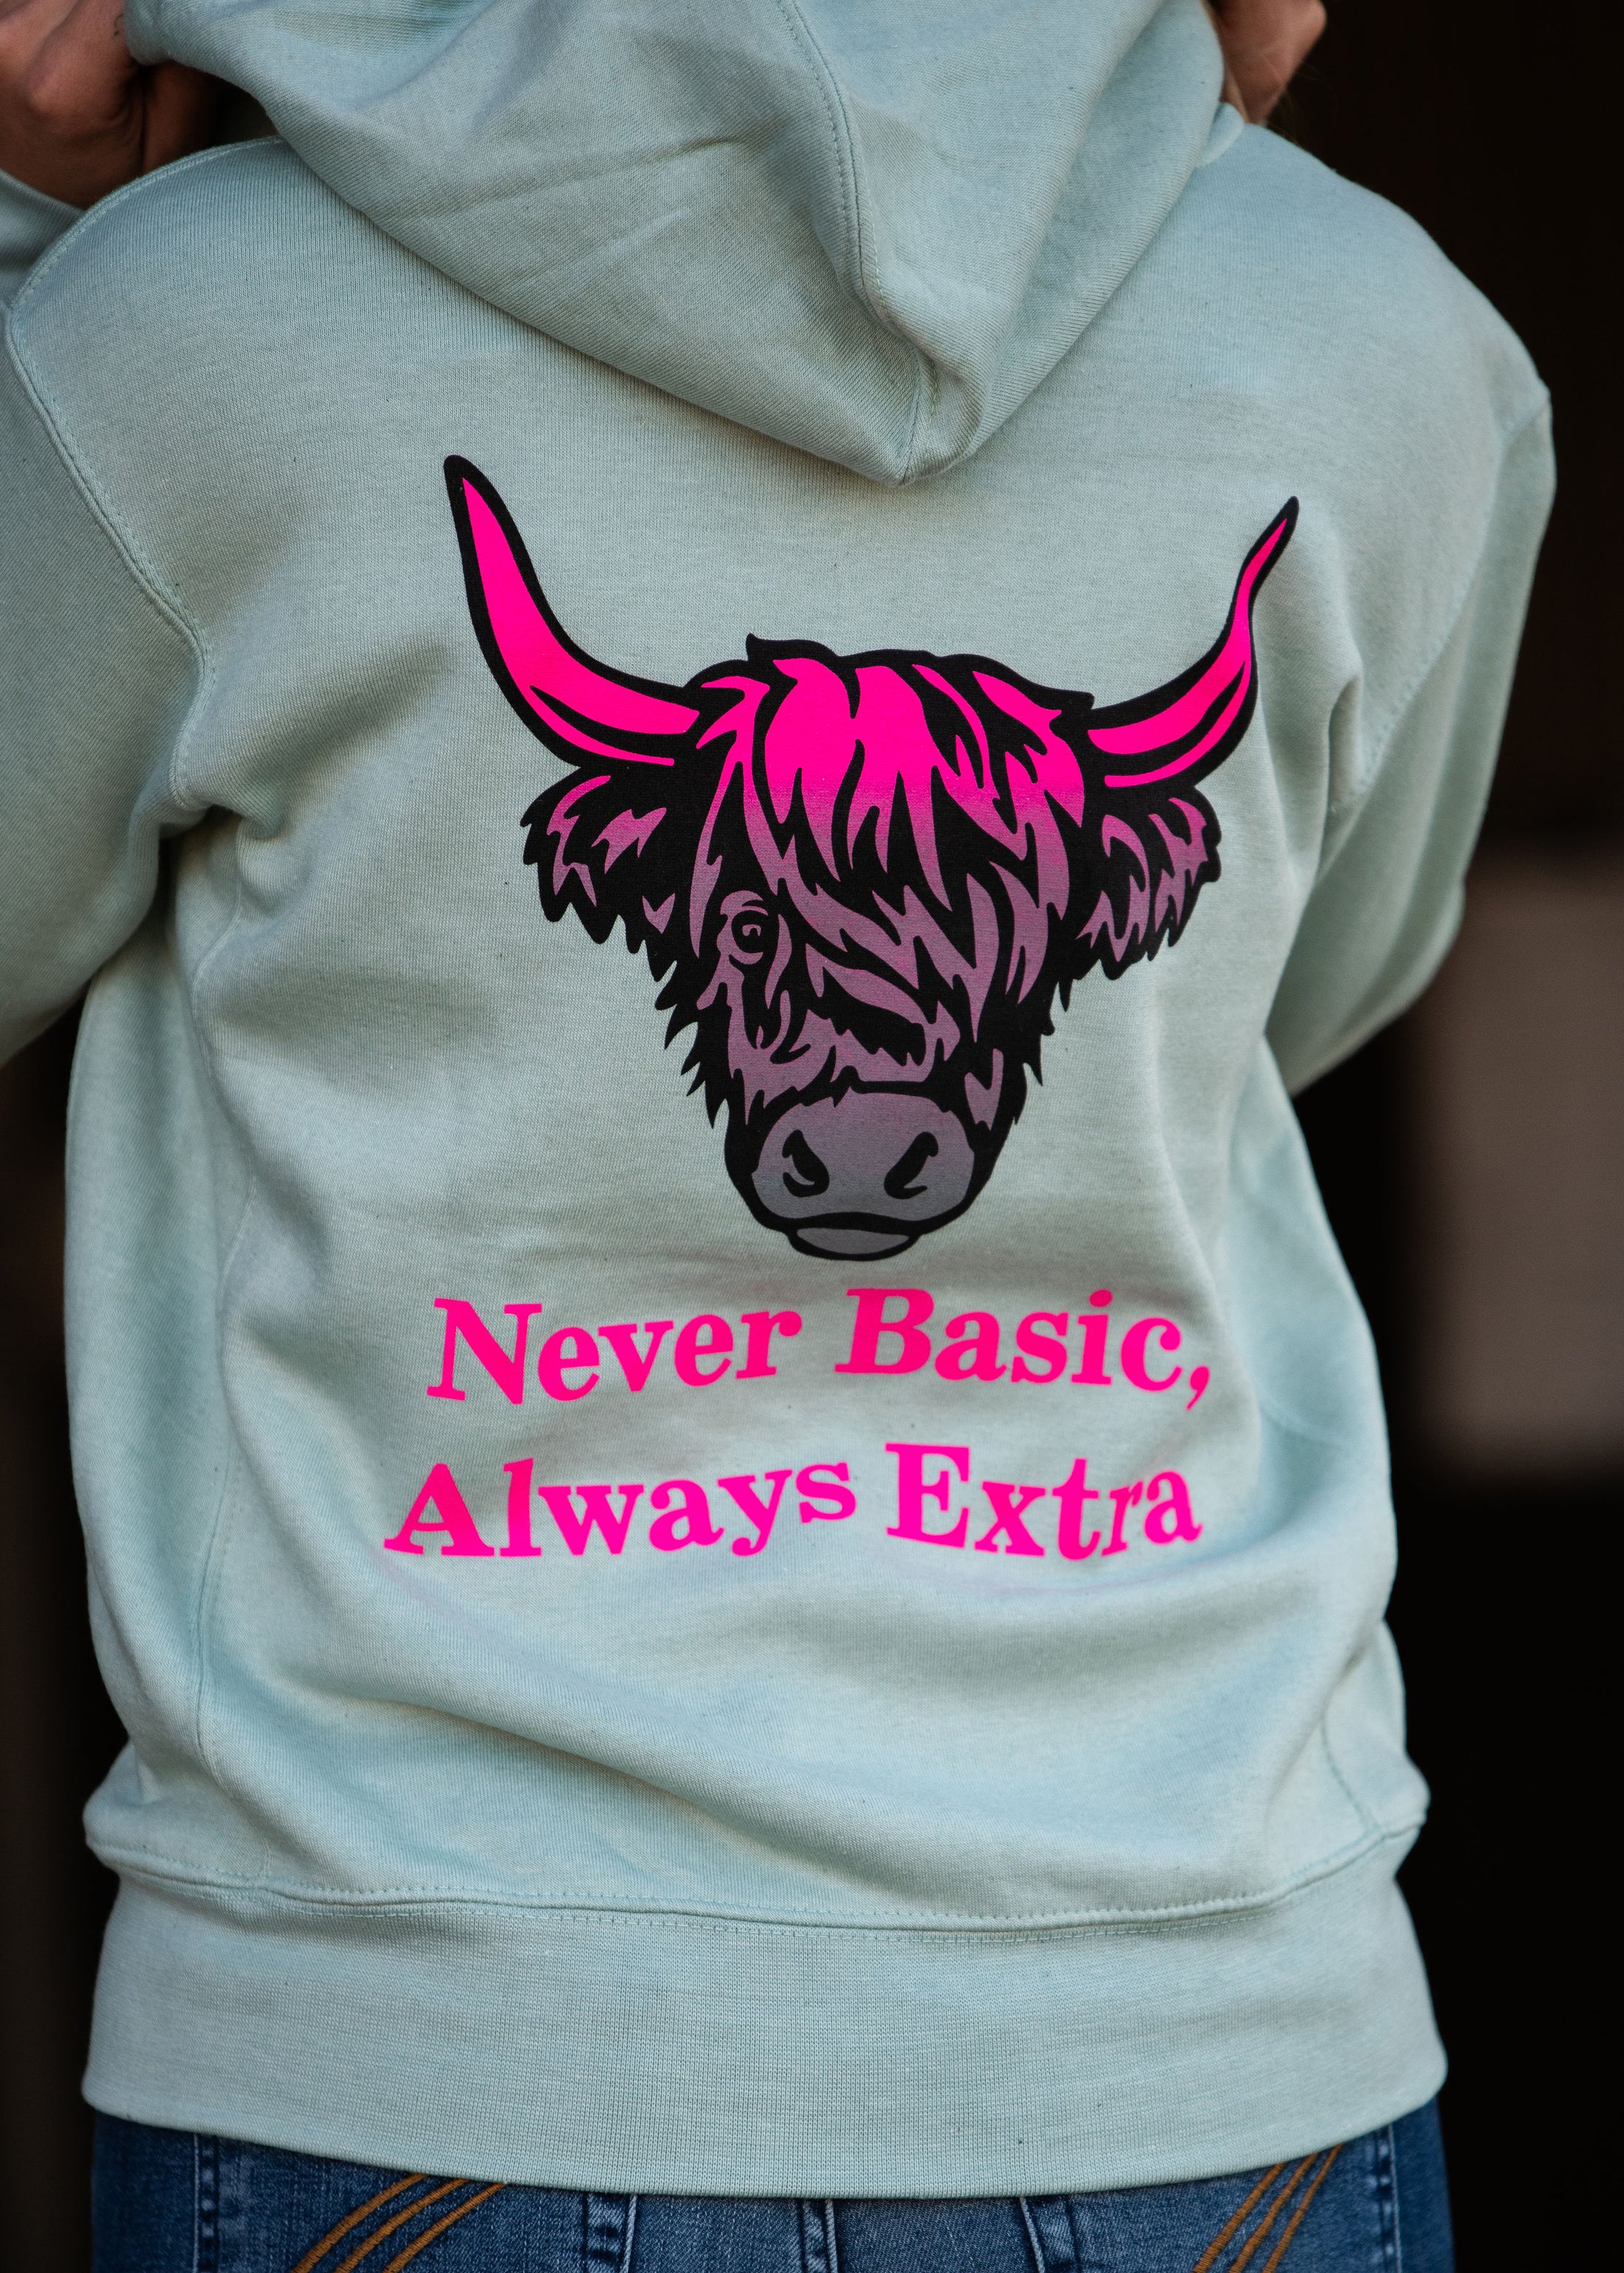 Teal & Hot Pink Highland Cow "Never Basic Always Extra"